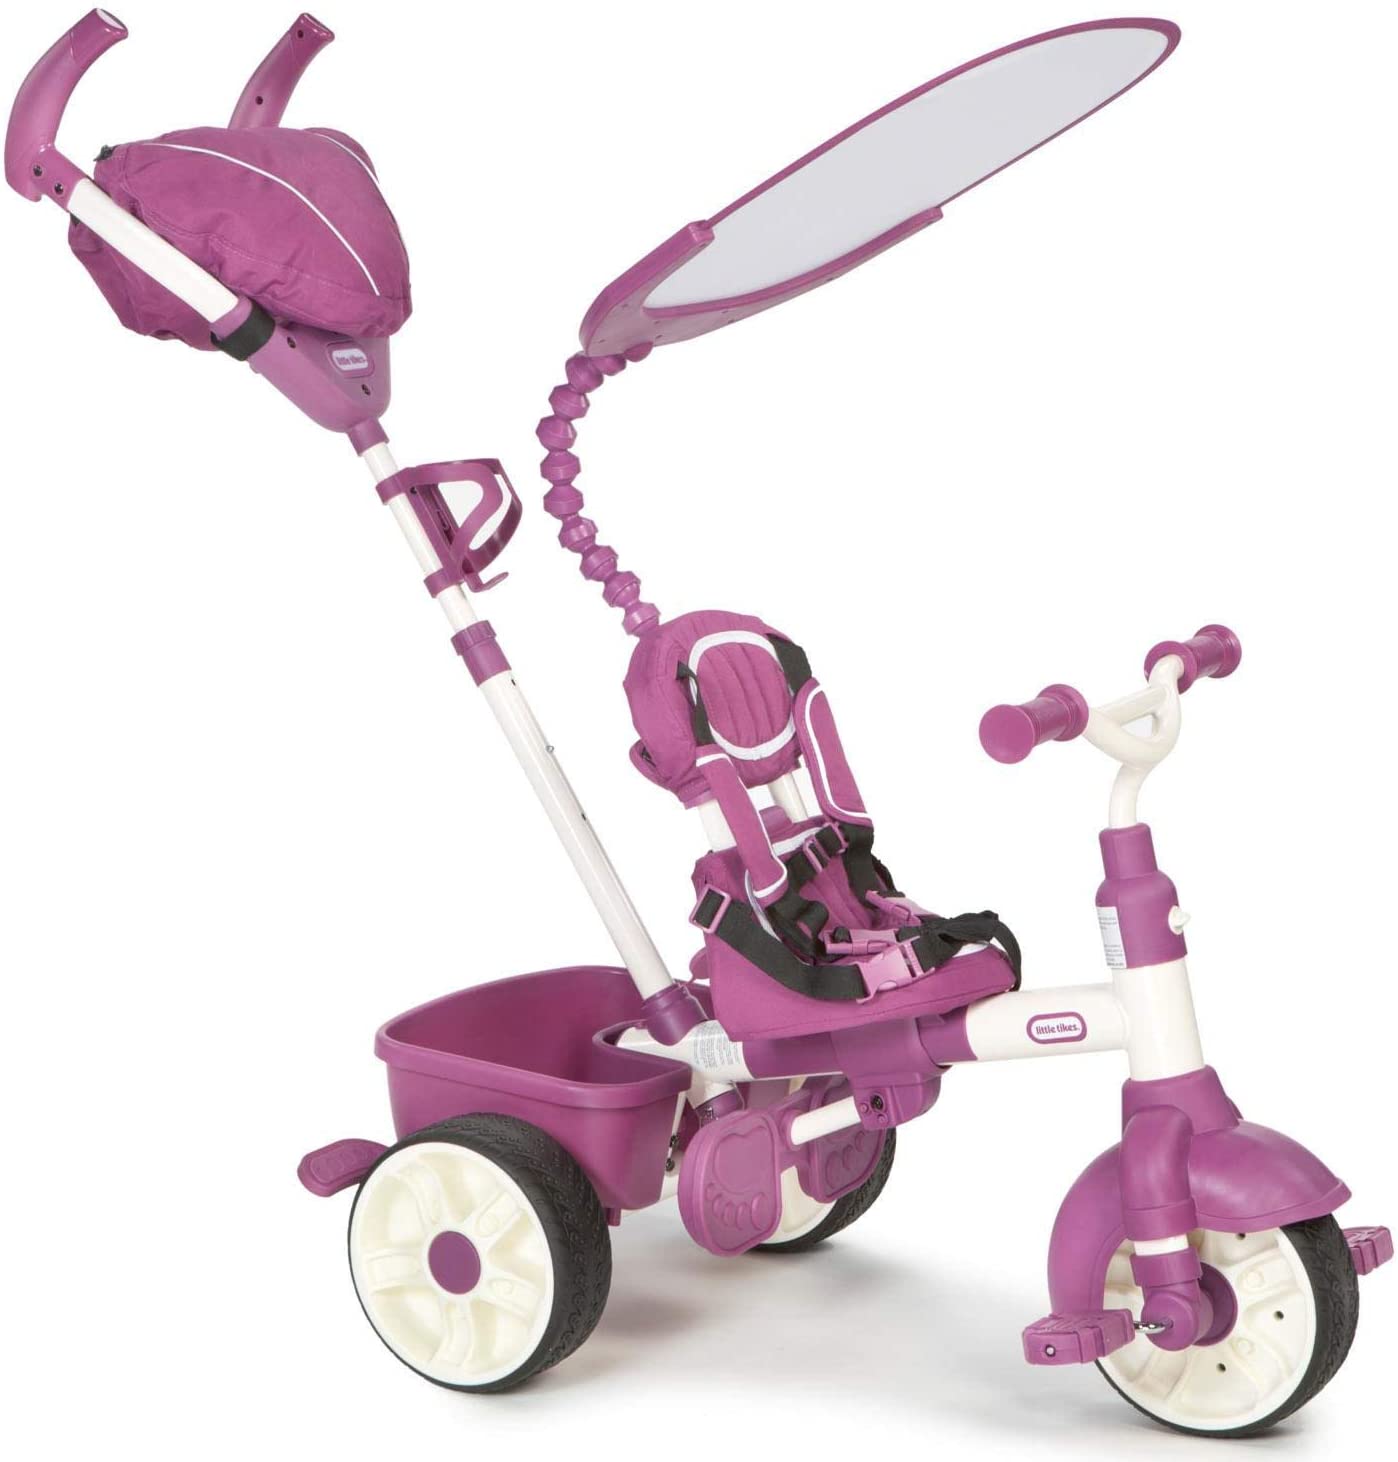 Little Tikes 4-in-1 Trike Sports Edition pink/purple tricycle - Best ...